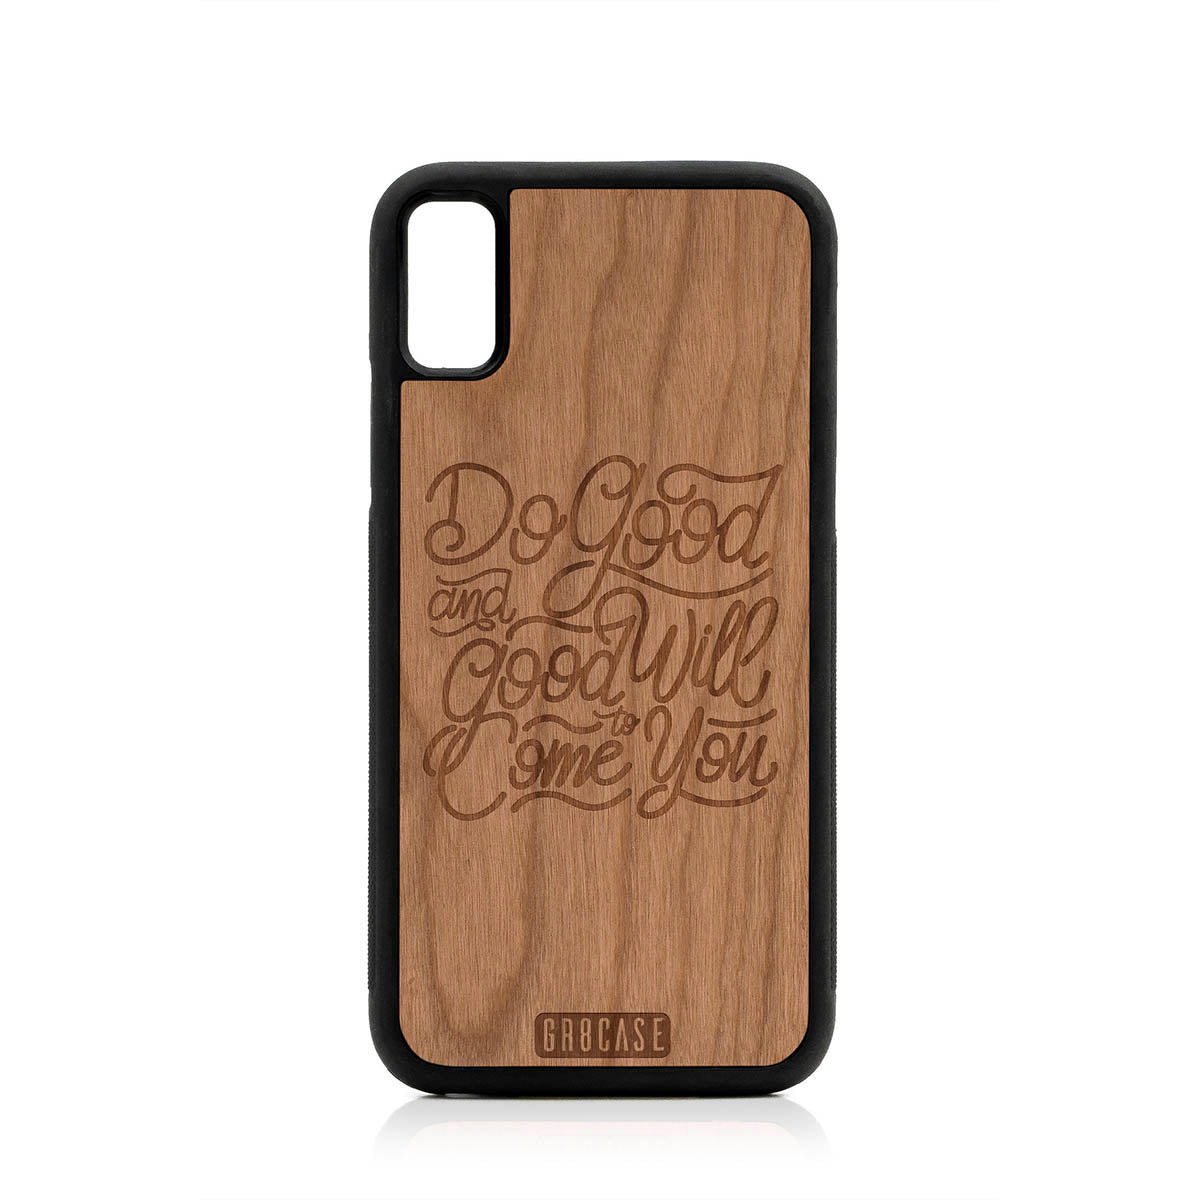 Do Good And Good Will Come To You Design Wood Case For iPhone XR by GR8CASE